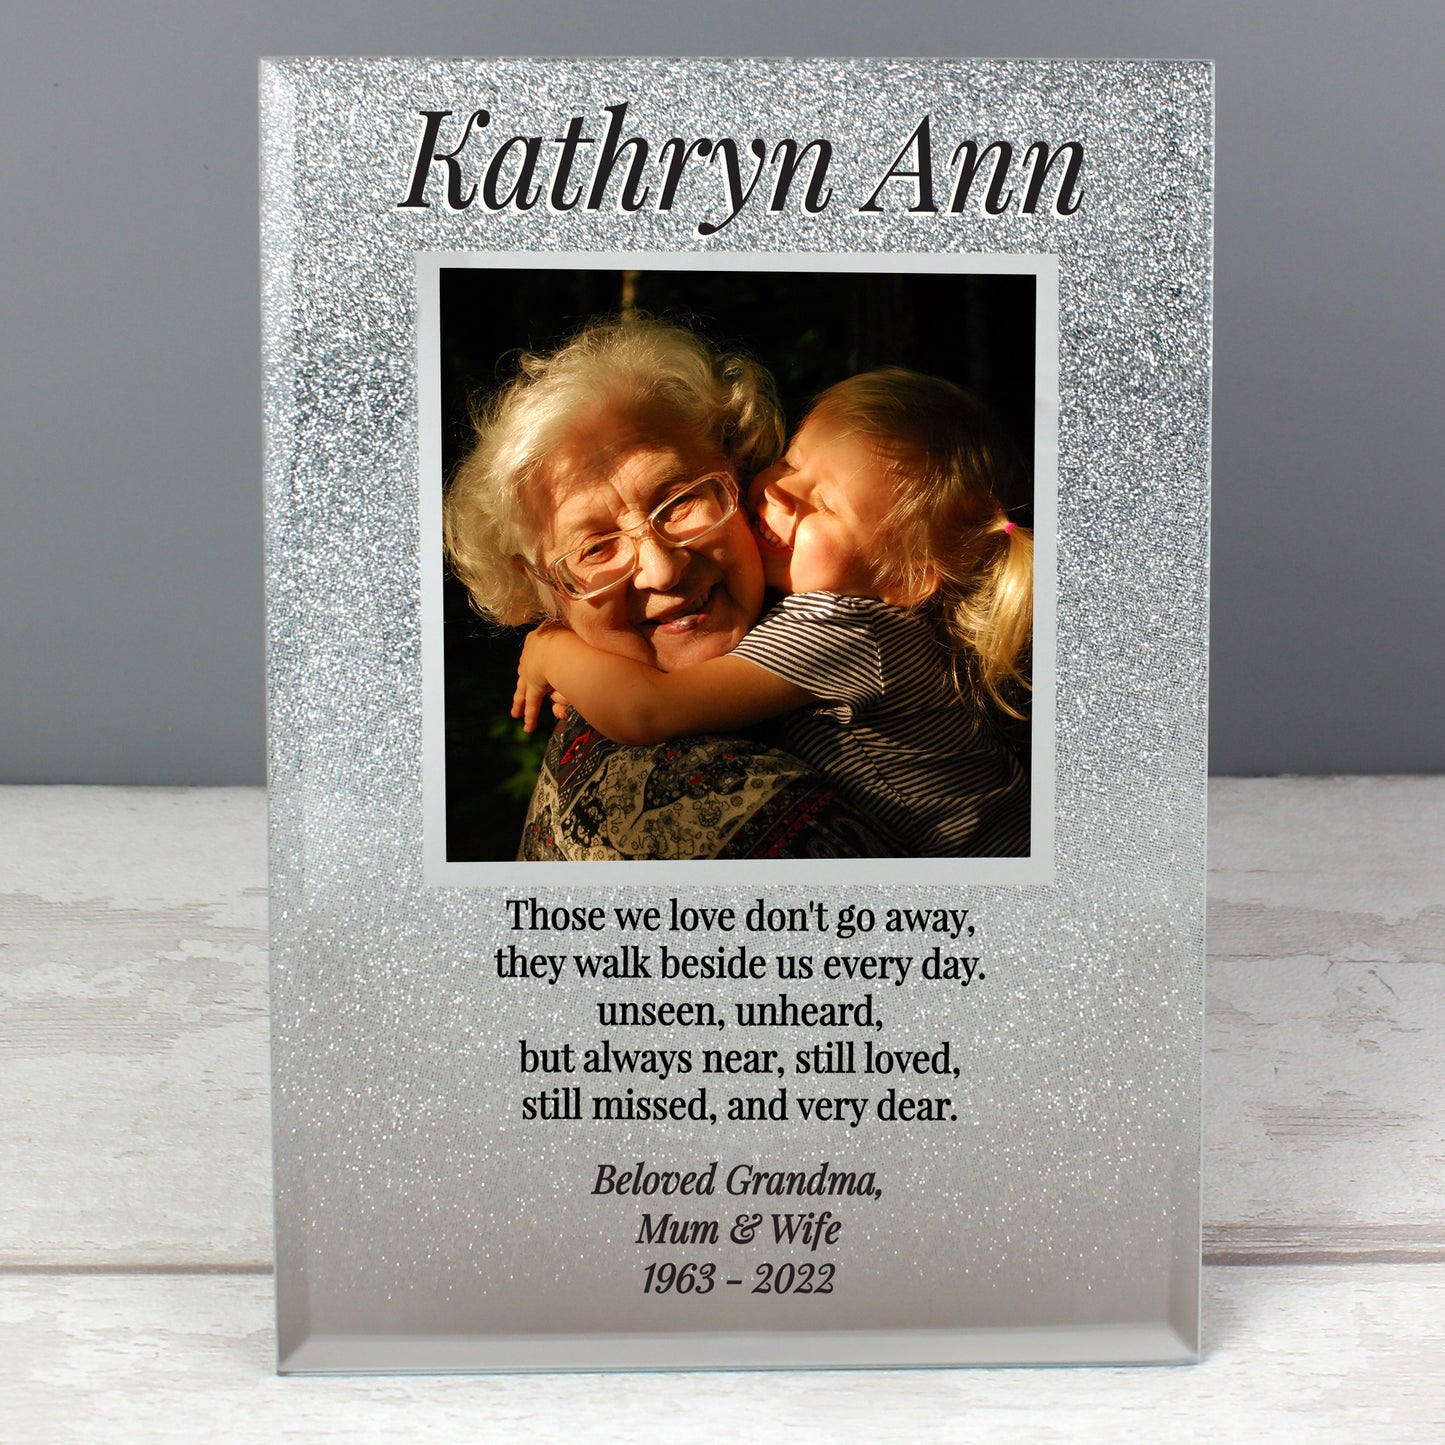 Personalised Memorial 4x4 Glitter Glass Photo Frame